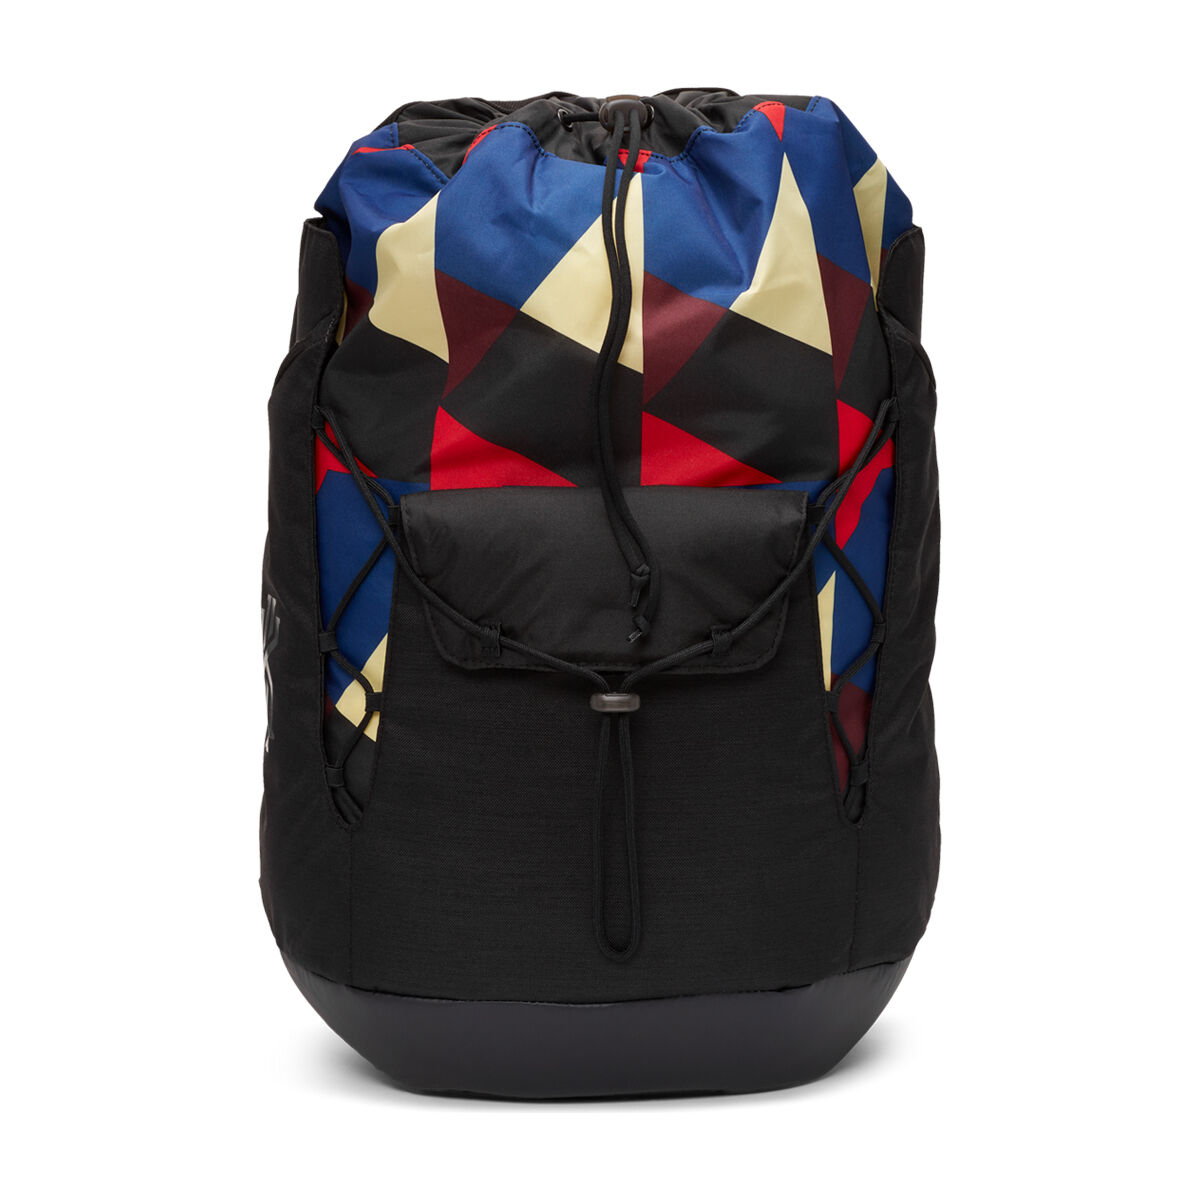 kyrie backpack all star